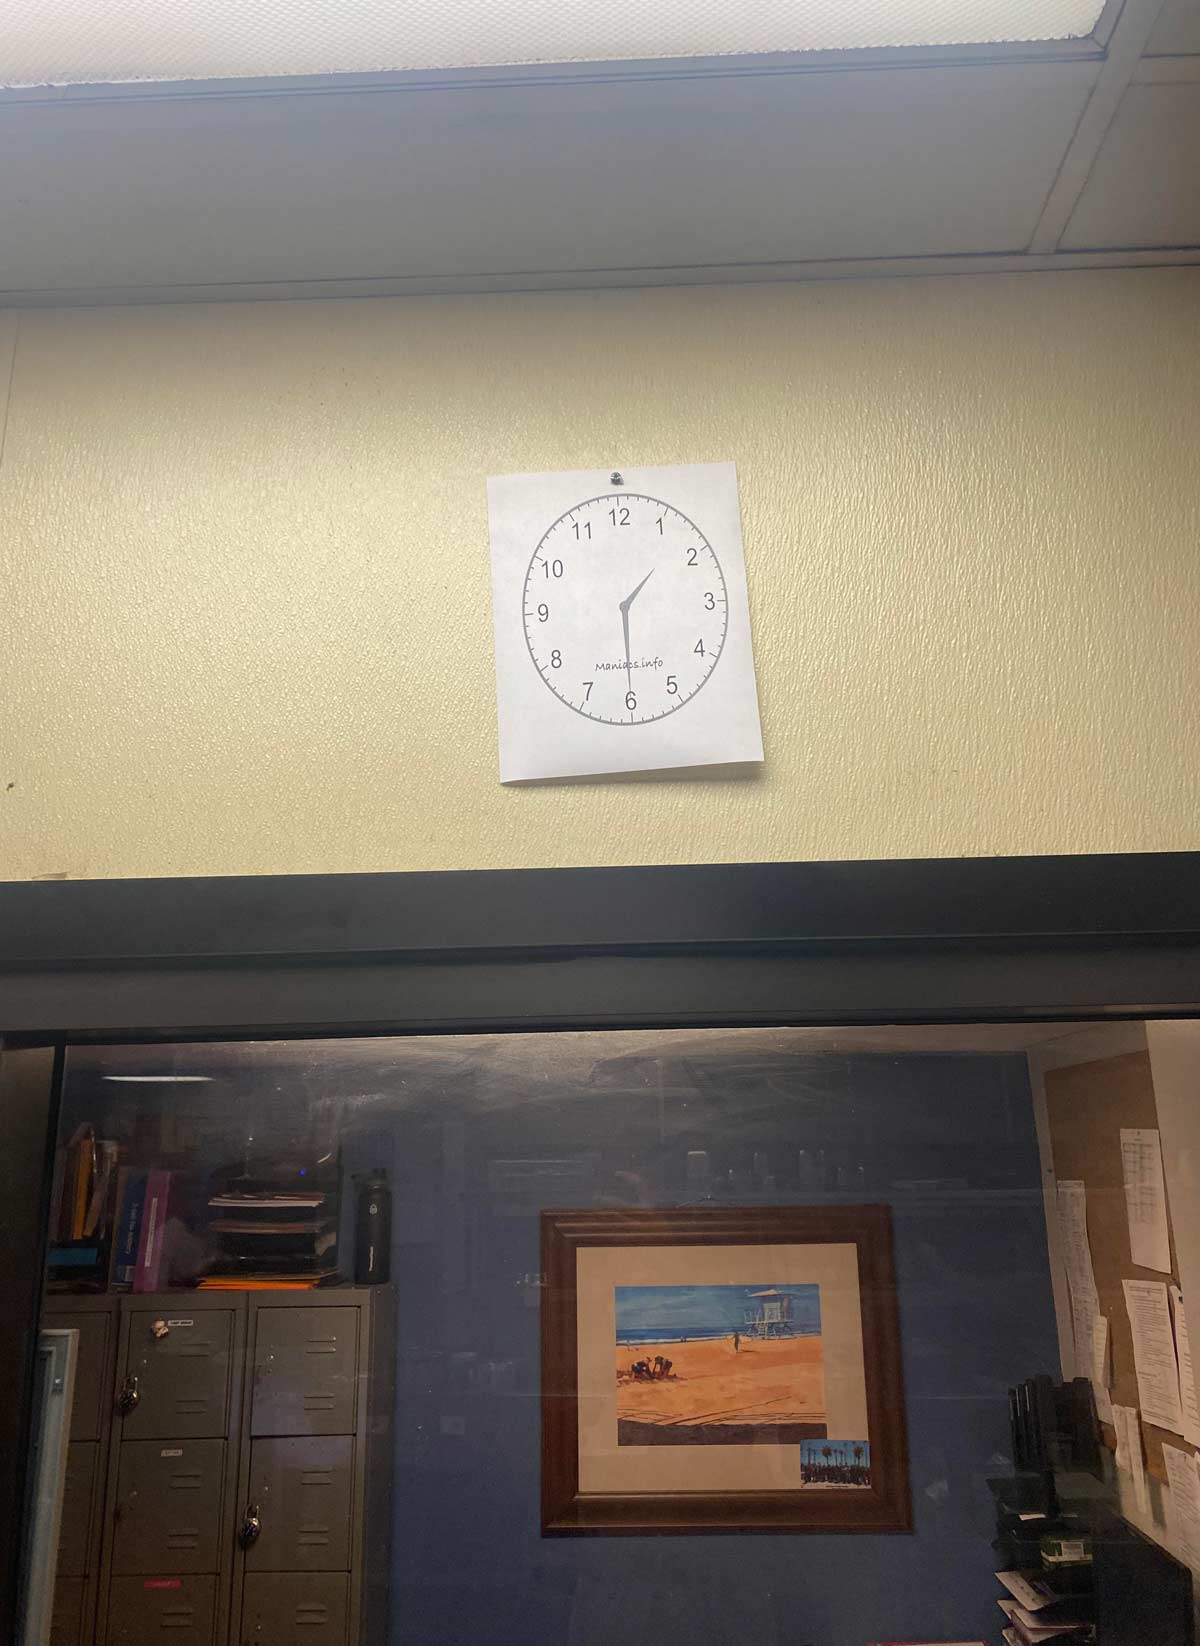 Our temporary replacement clock